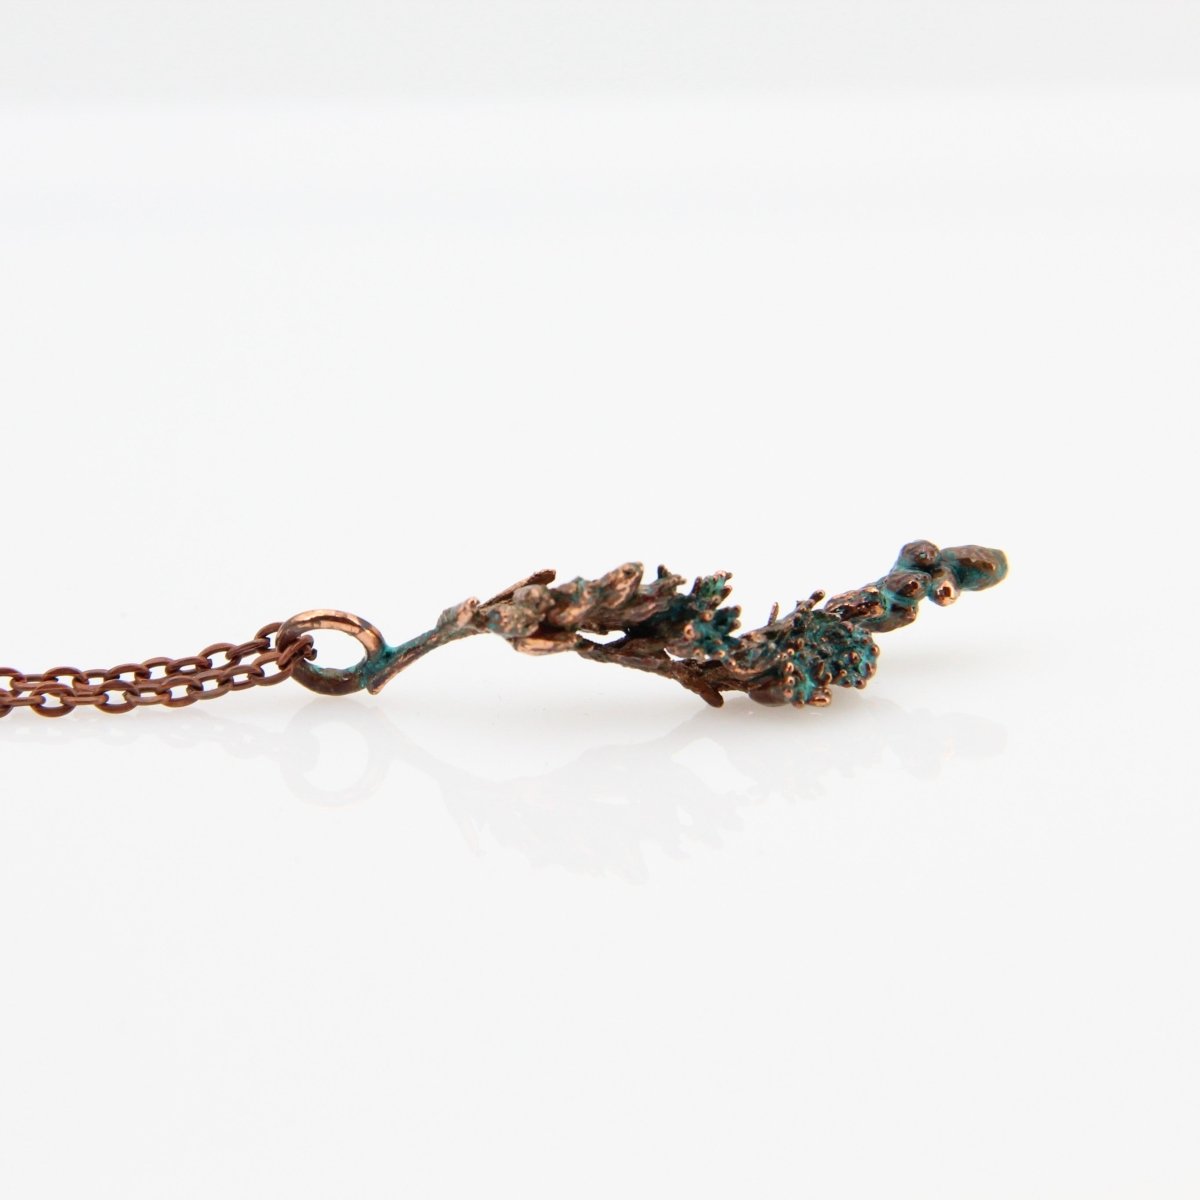 Real Plant Jewelry, Goldenrod Flower Sprig, Solidago rugosa, Copper Electroformed Pendant with Antique Patina, Gift for Nature Lover